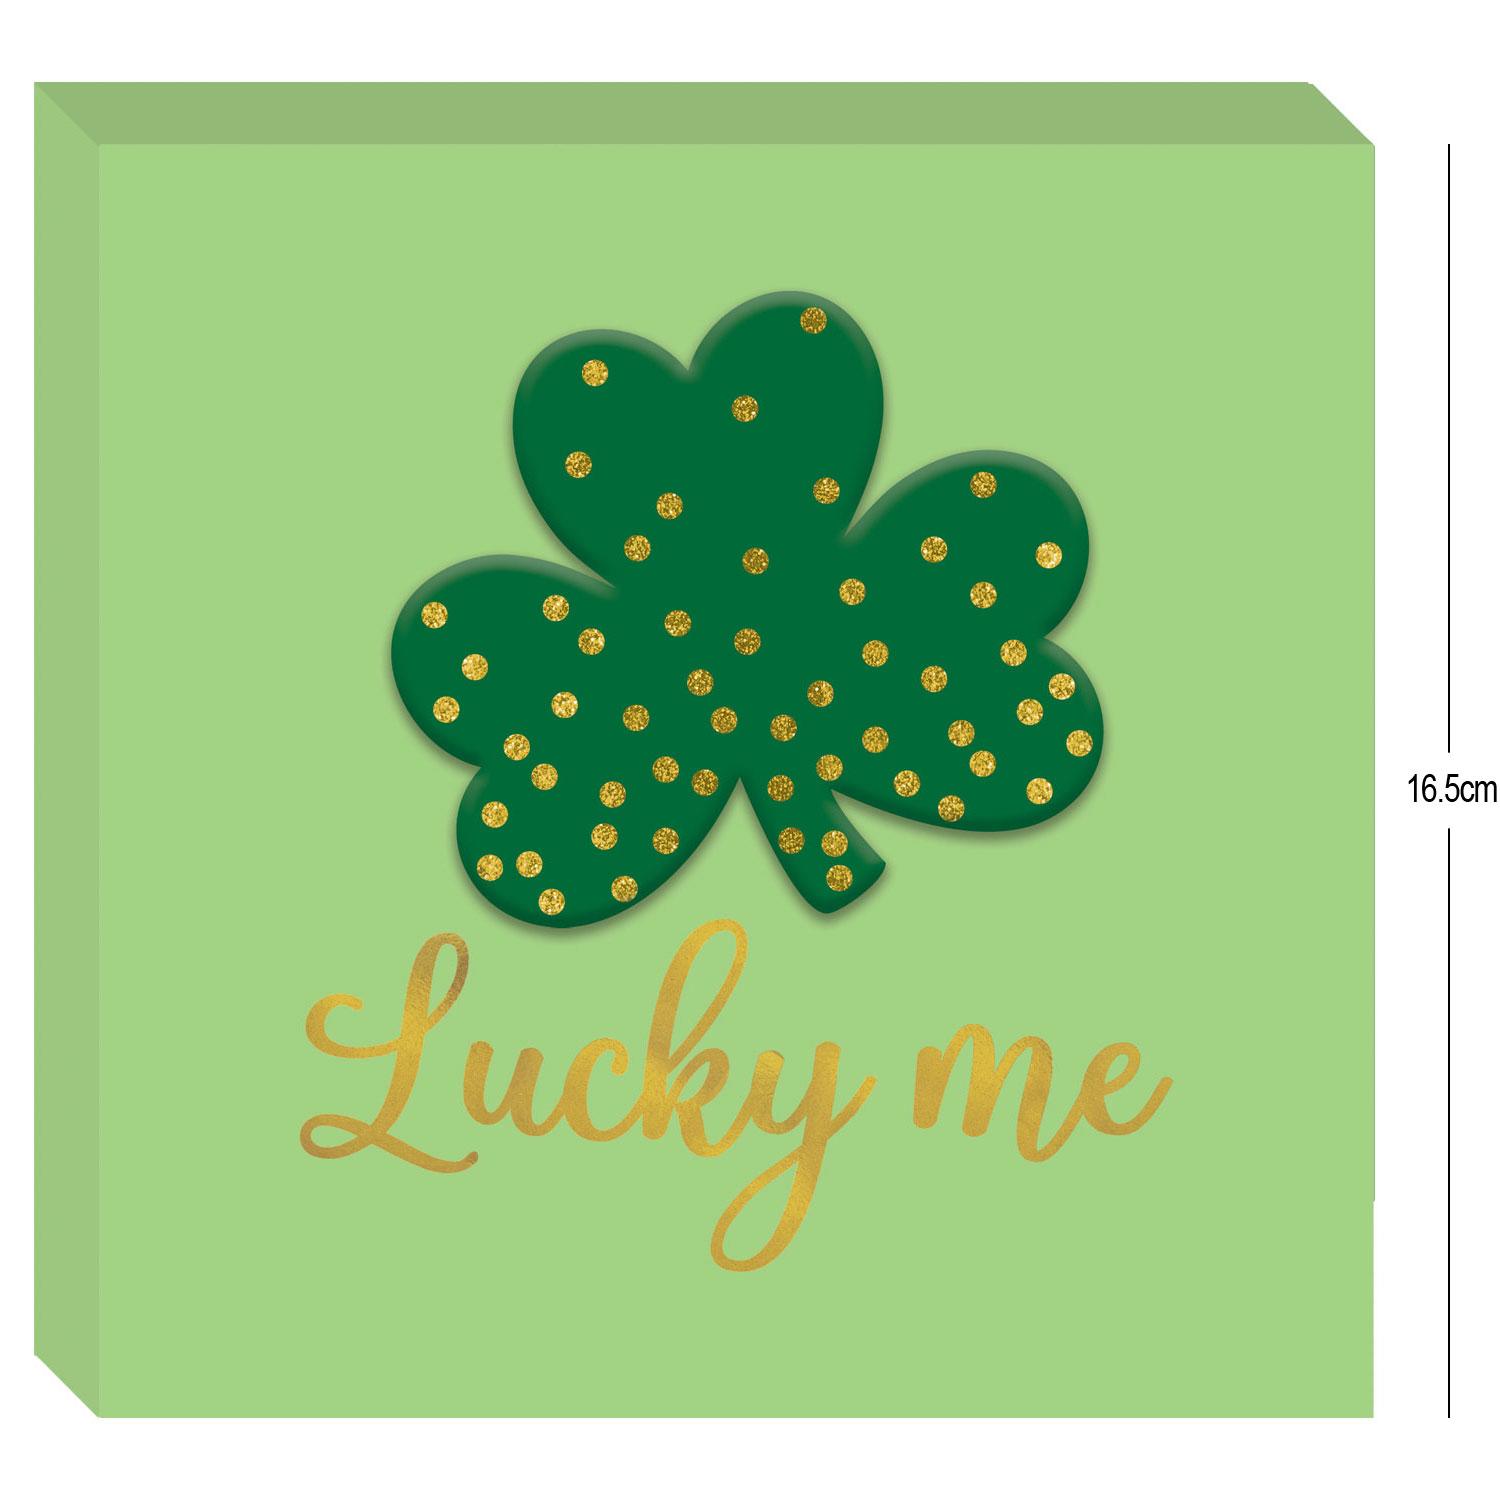 Lucky Me Standing MDF Plaque 16.5cm x 16.5cm x 3.1cm by Amscan 242550 available here at Karnival Costumes online party shop